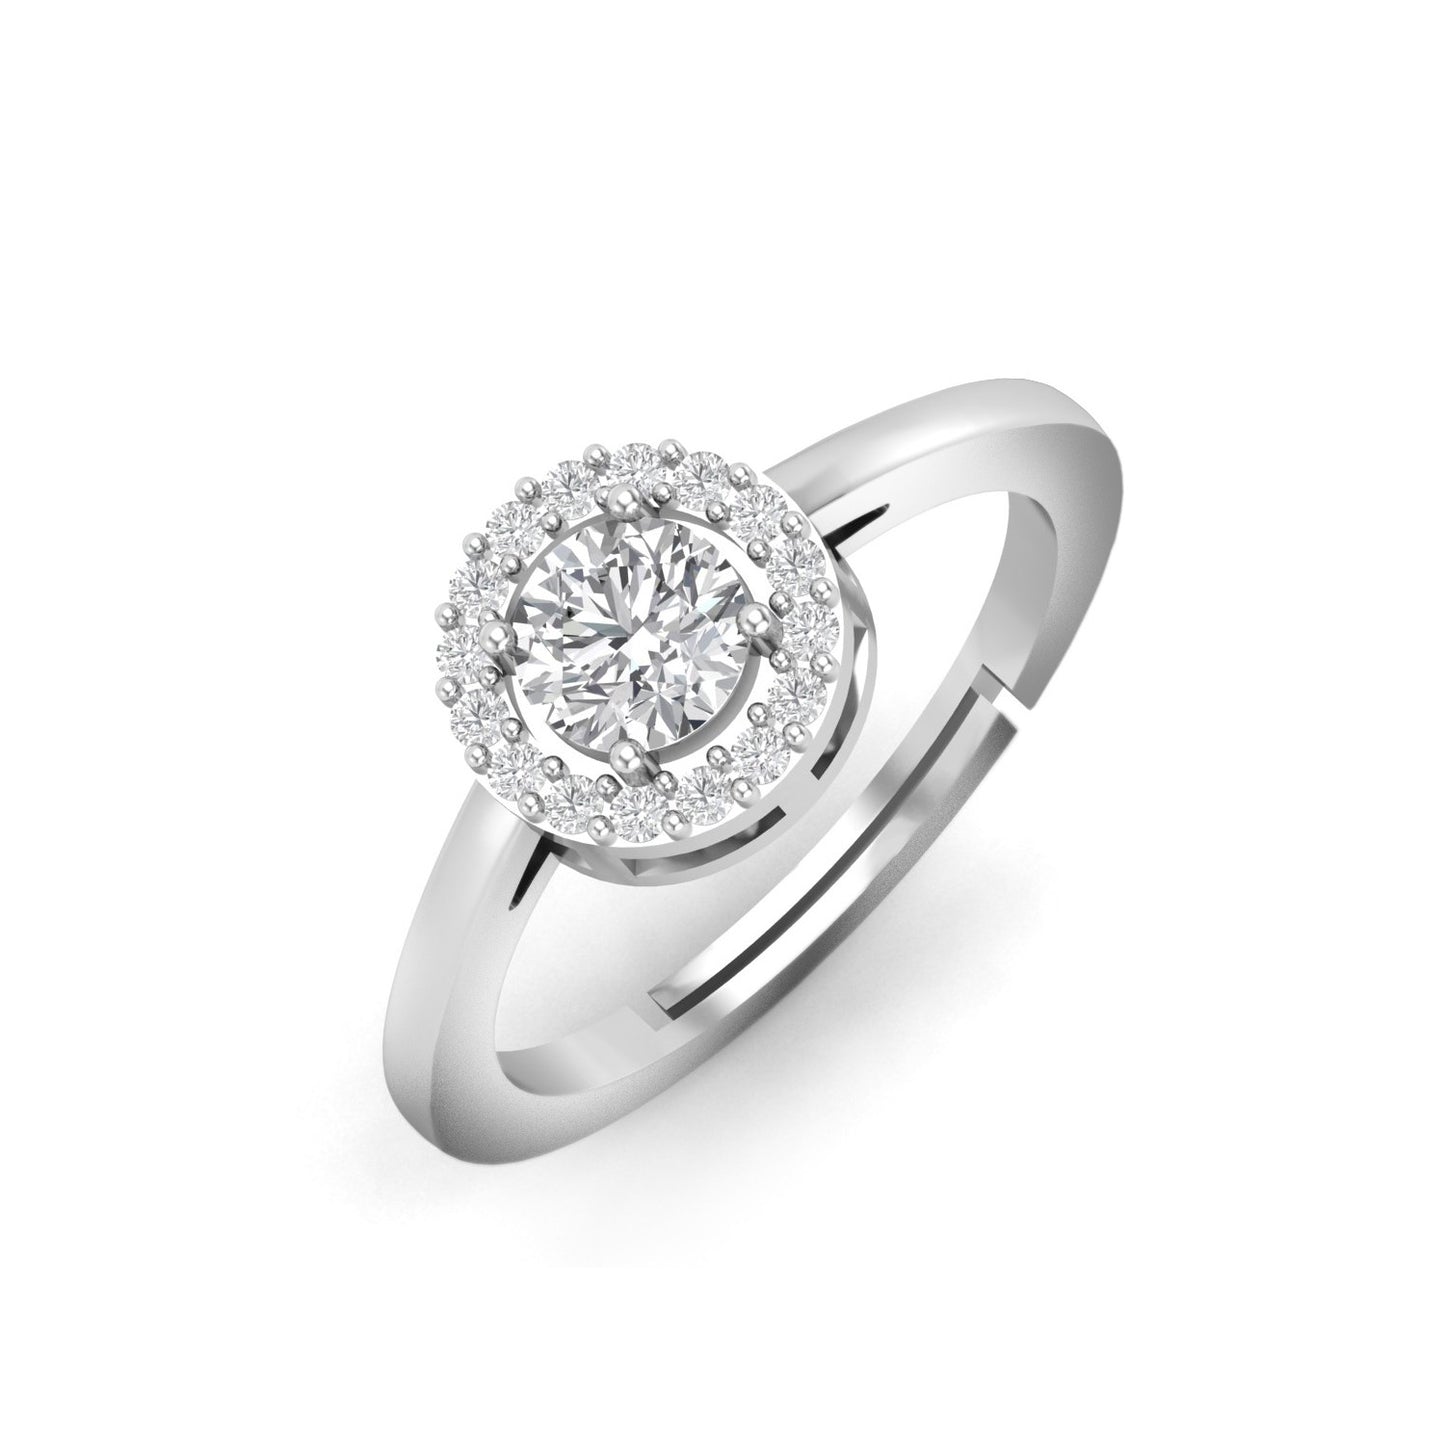 Halo Solitaire Ring - 925 Silver